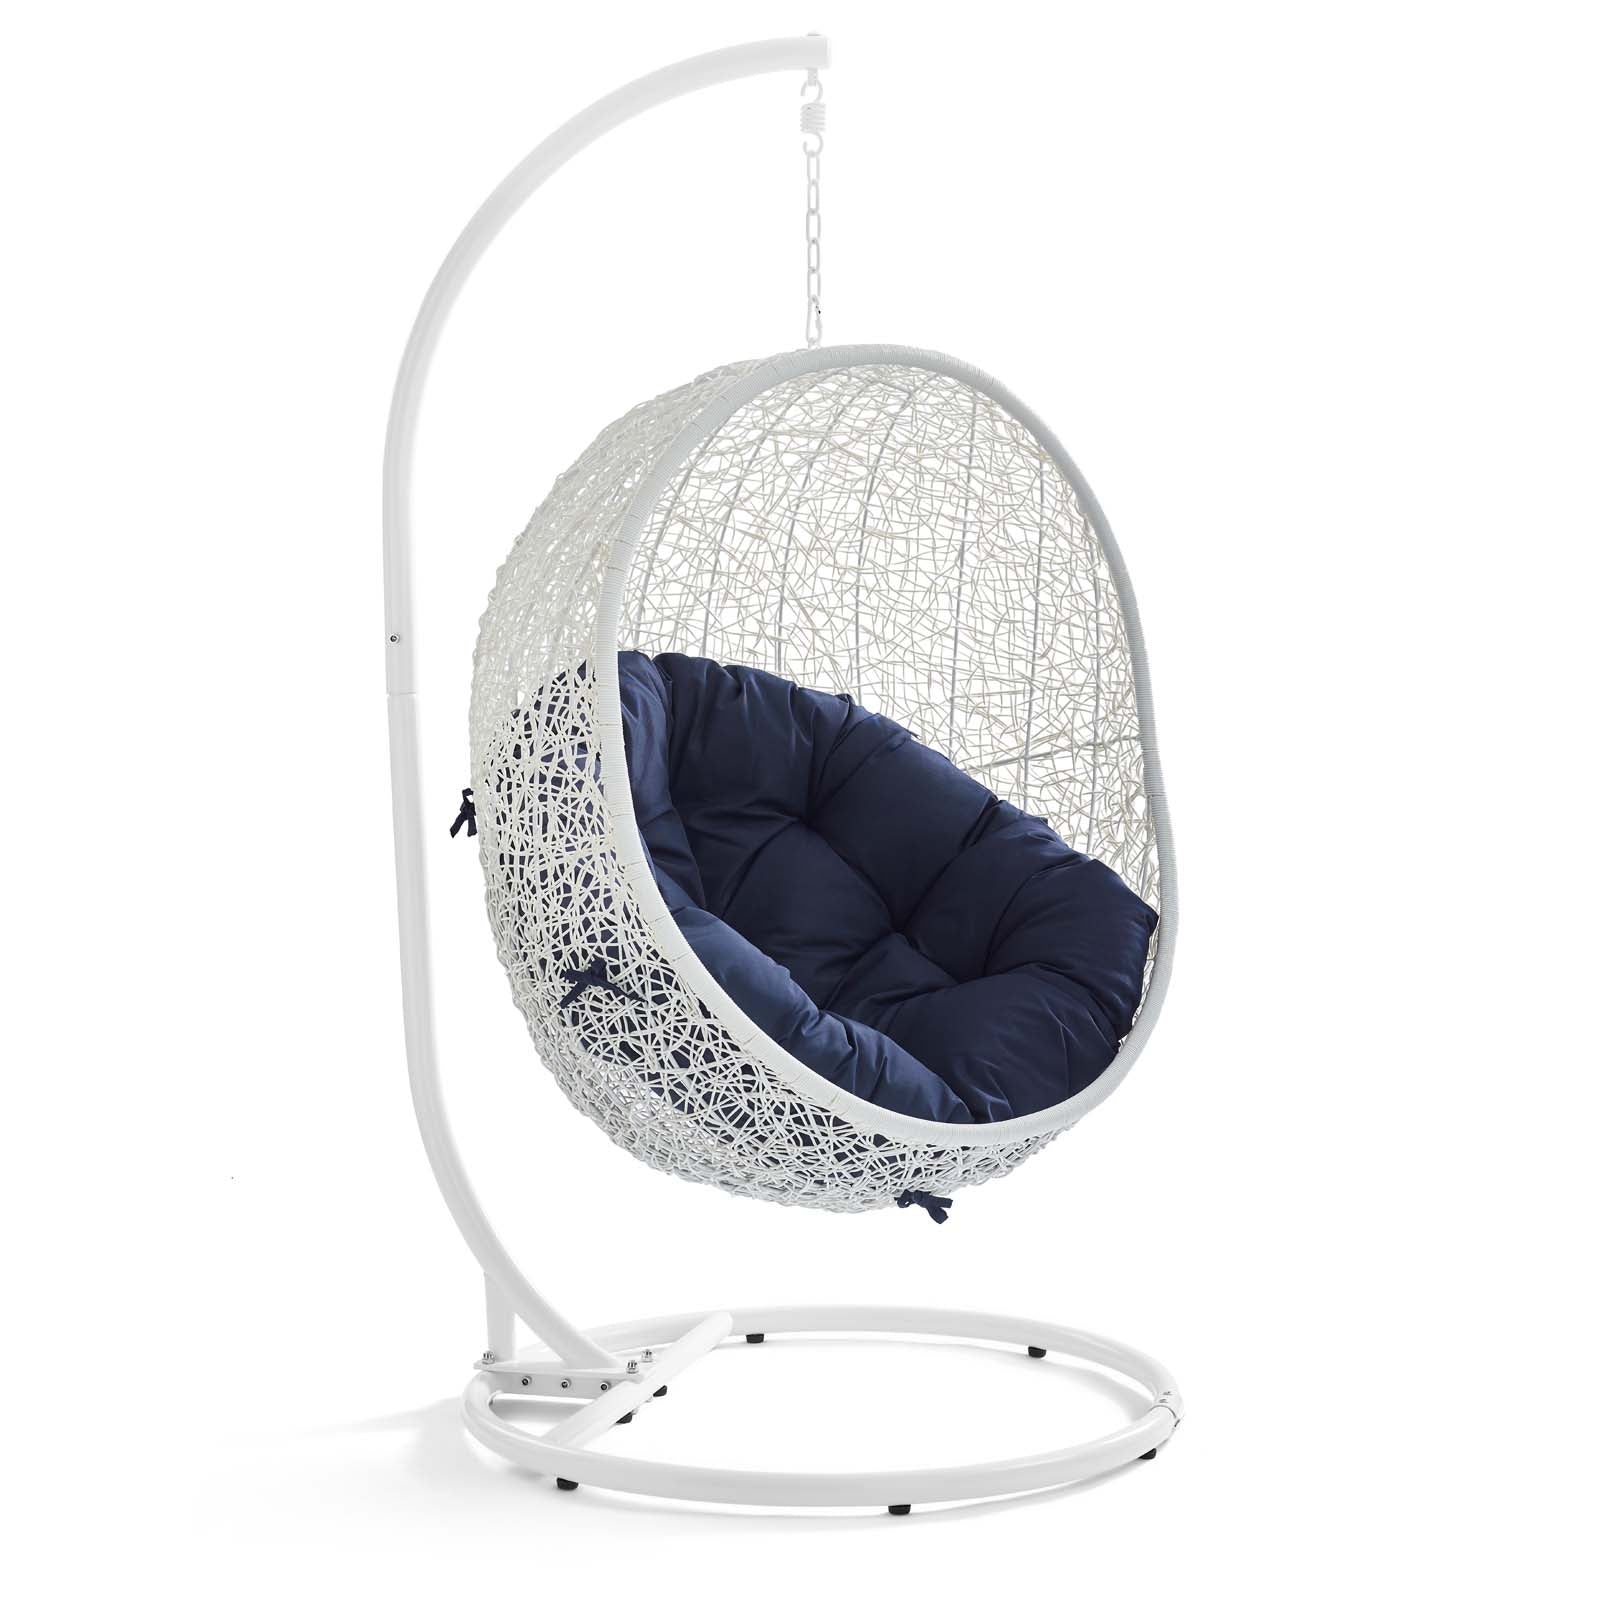 Modway Outdoor Swings - Hide Outdoor Patio Sunbrella Swing Chair With Stand White Navy